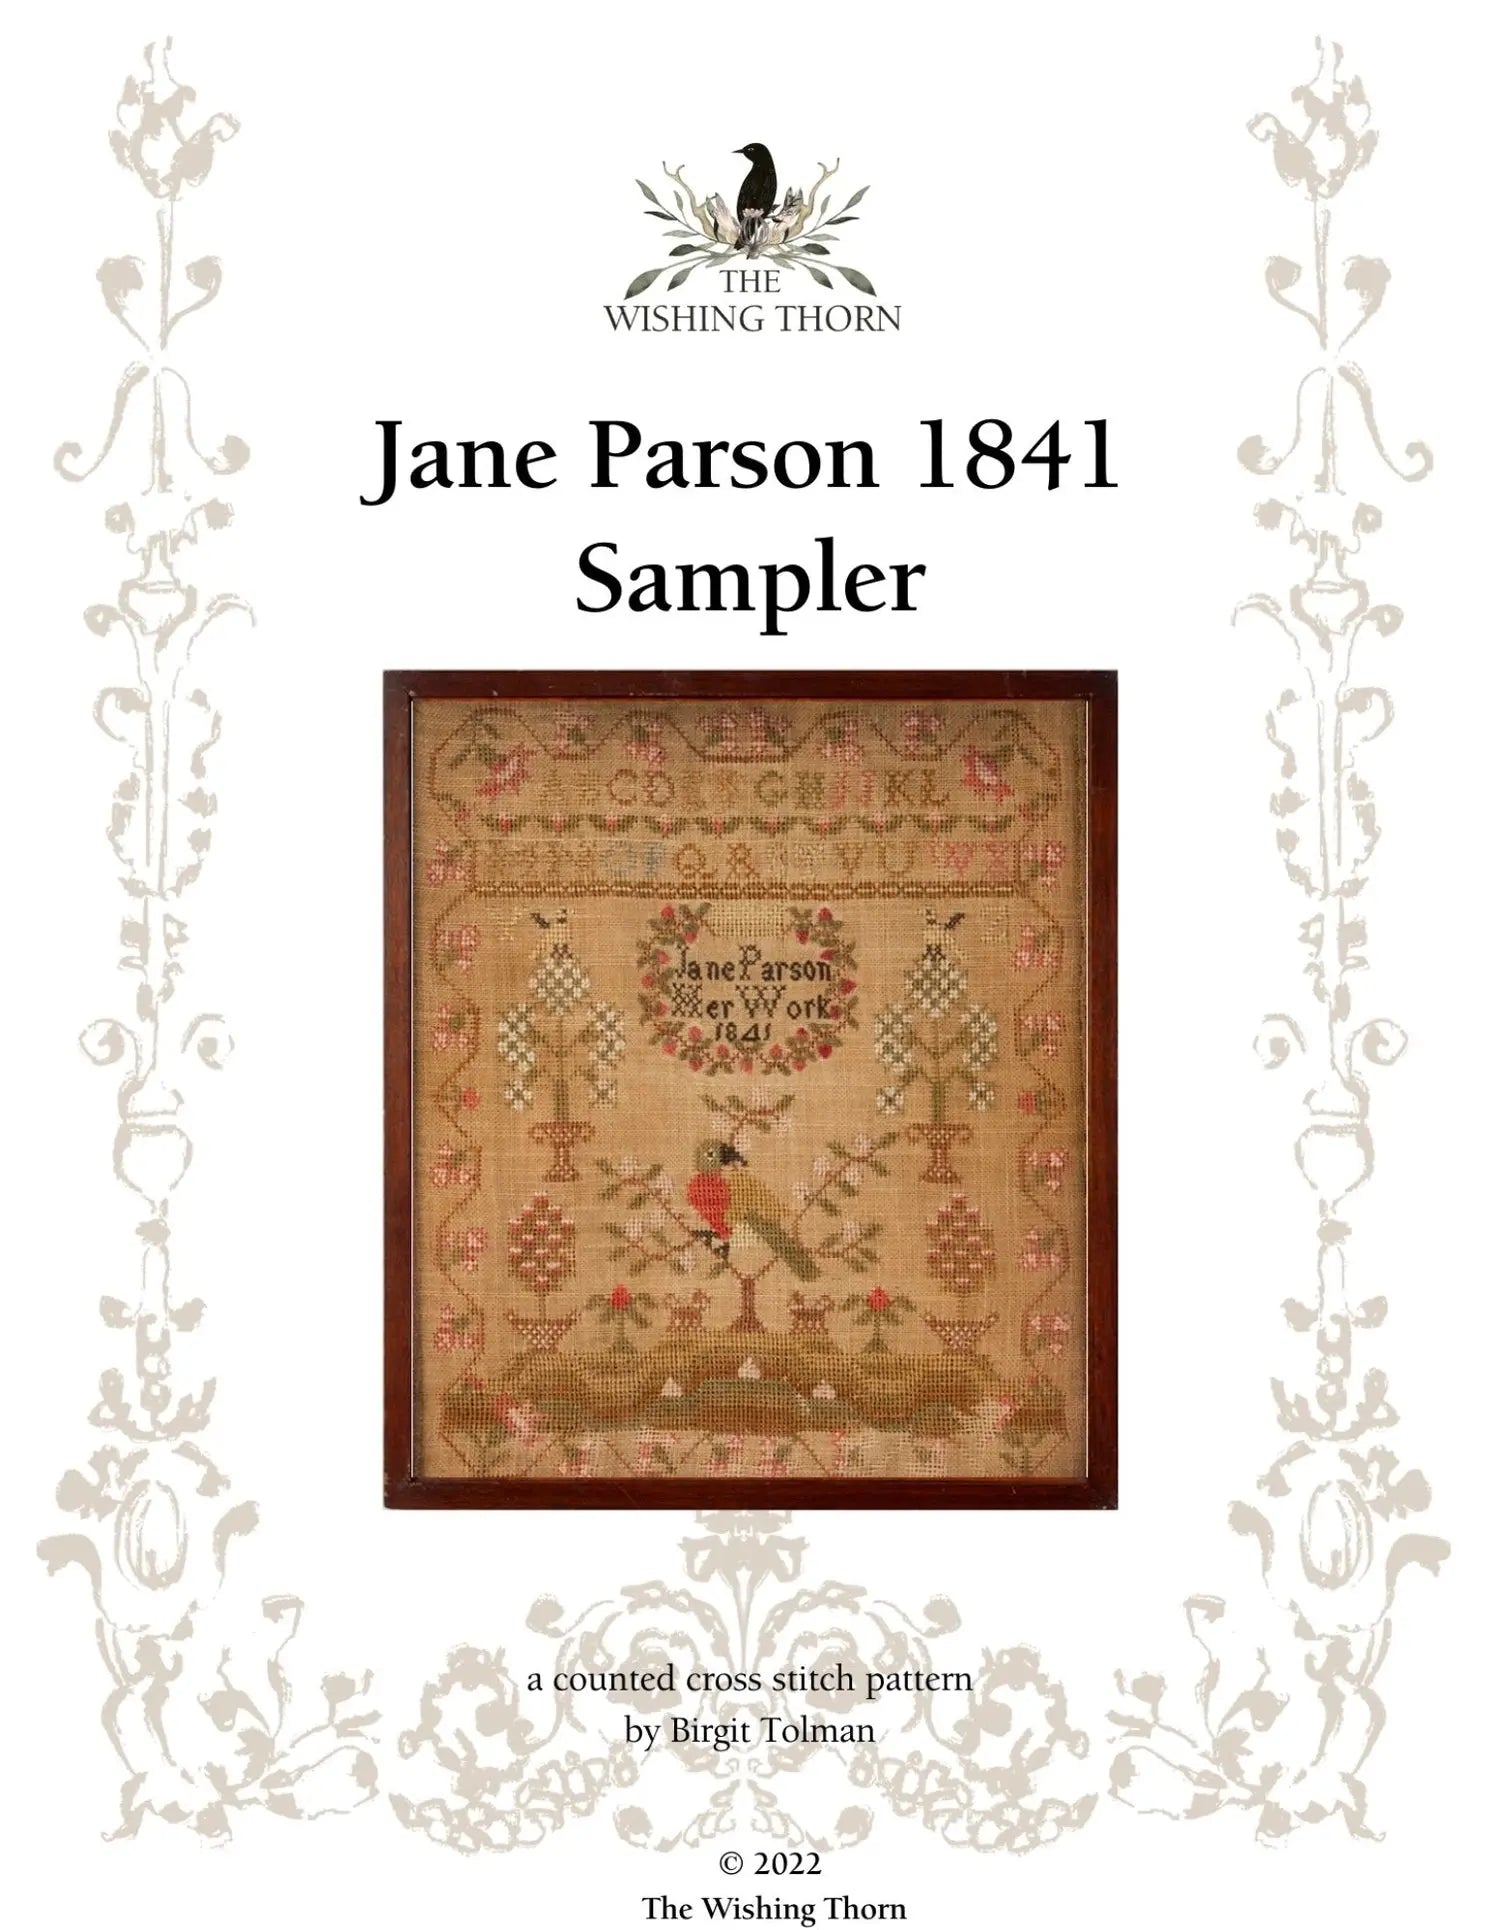 Jane Parson 1841 Sampler by The Wishing Thorn The Wishing Thorn